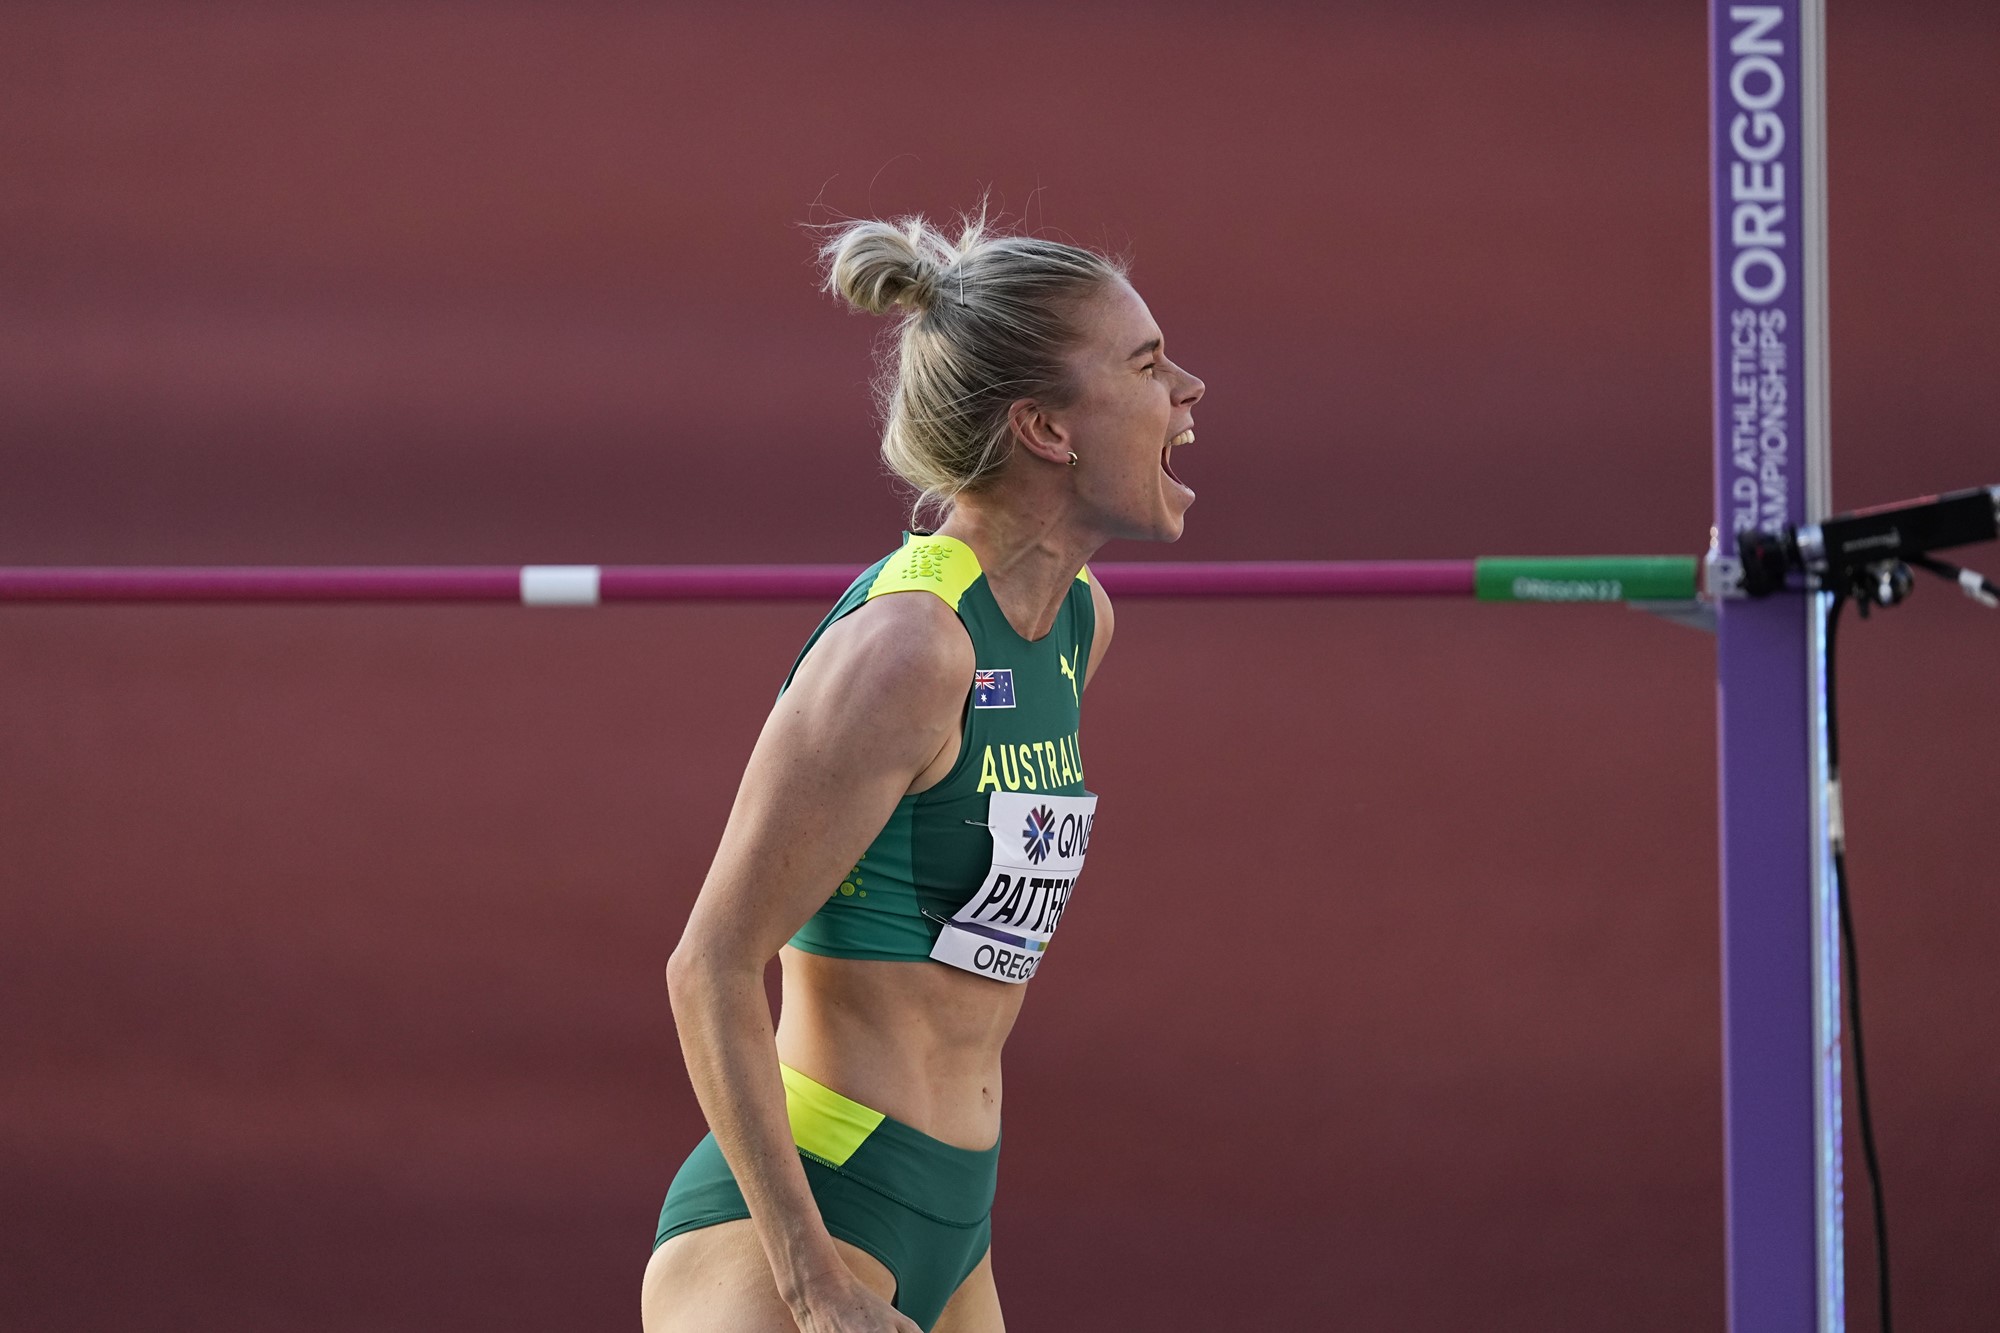 Eleanor Patterson shouts with joy after clearing the bar in the world athletics championships high jump final.